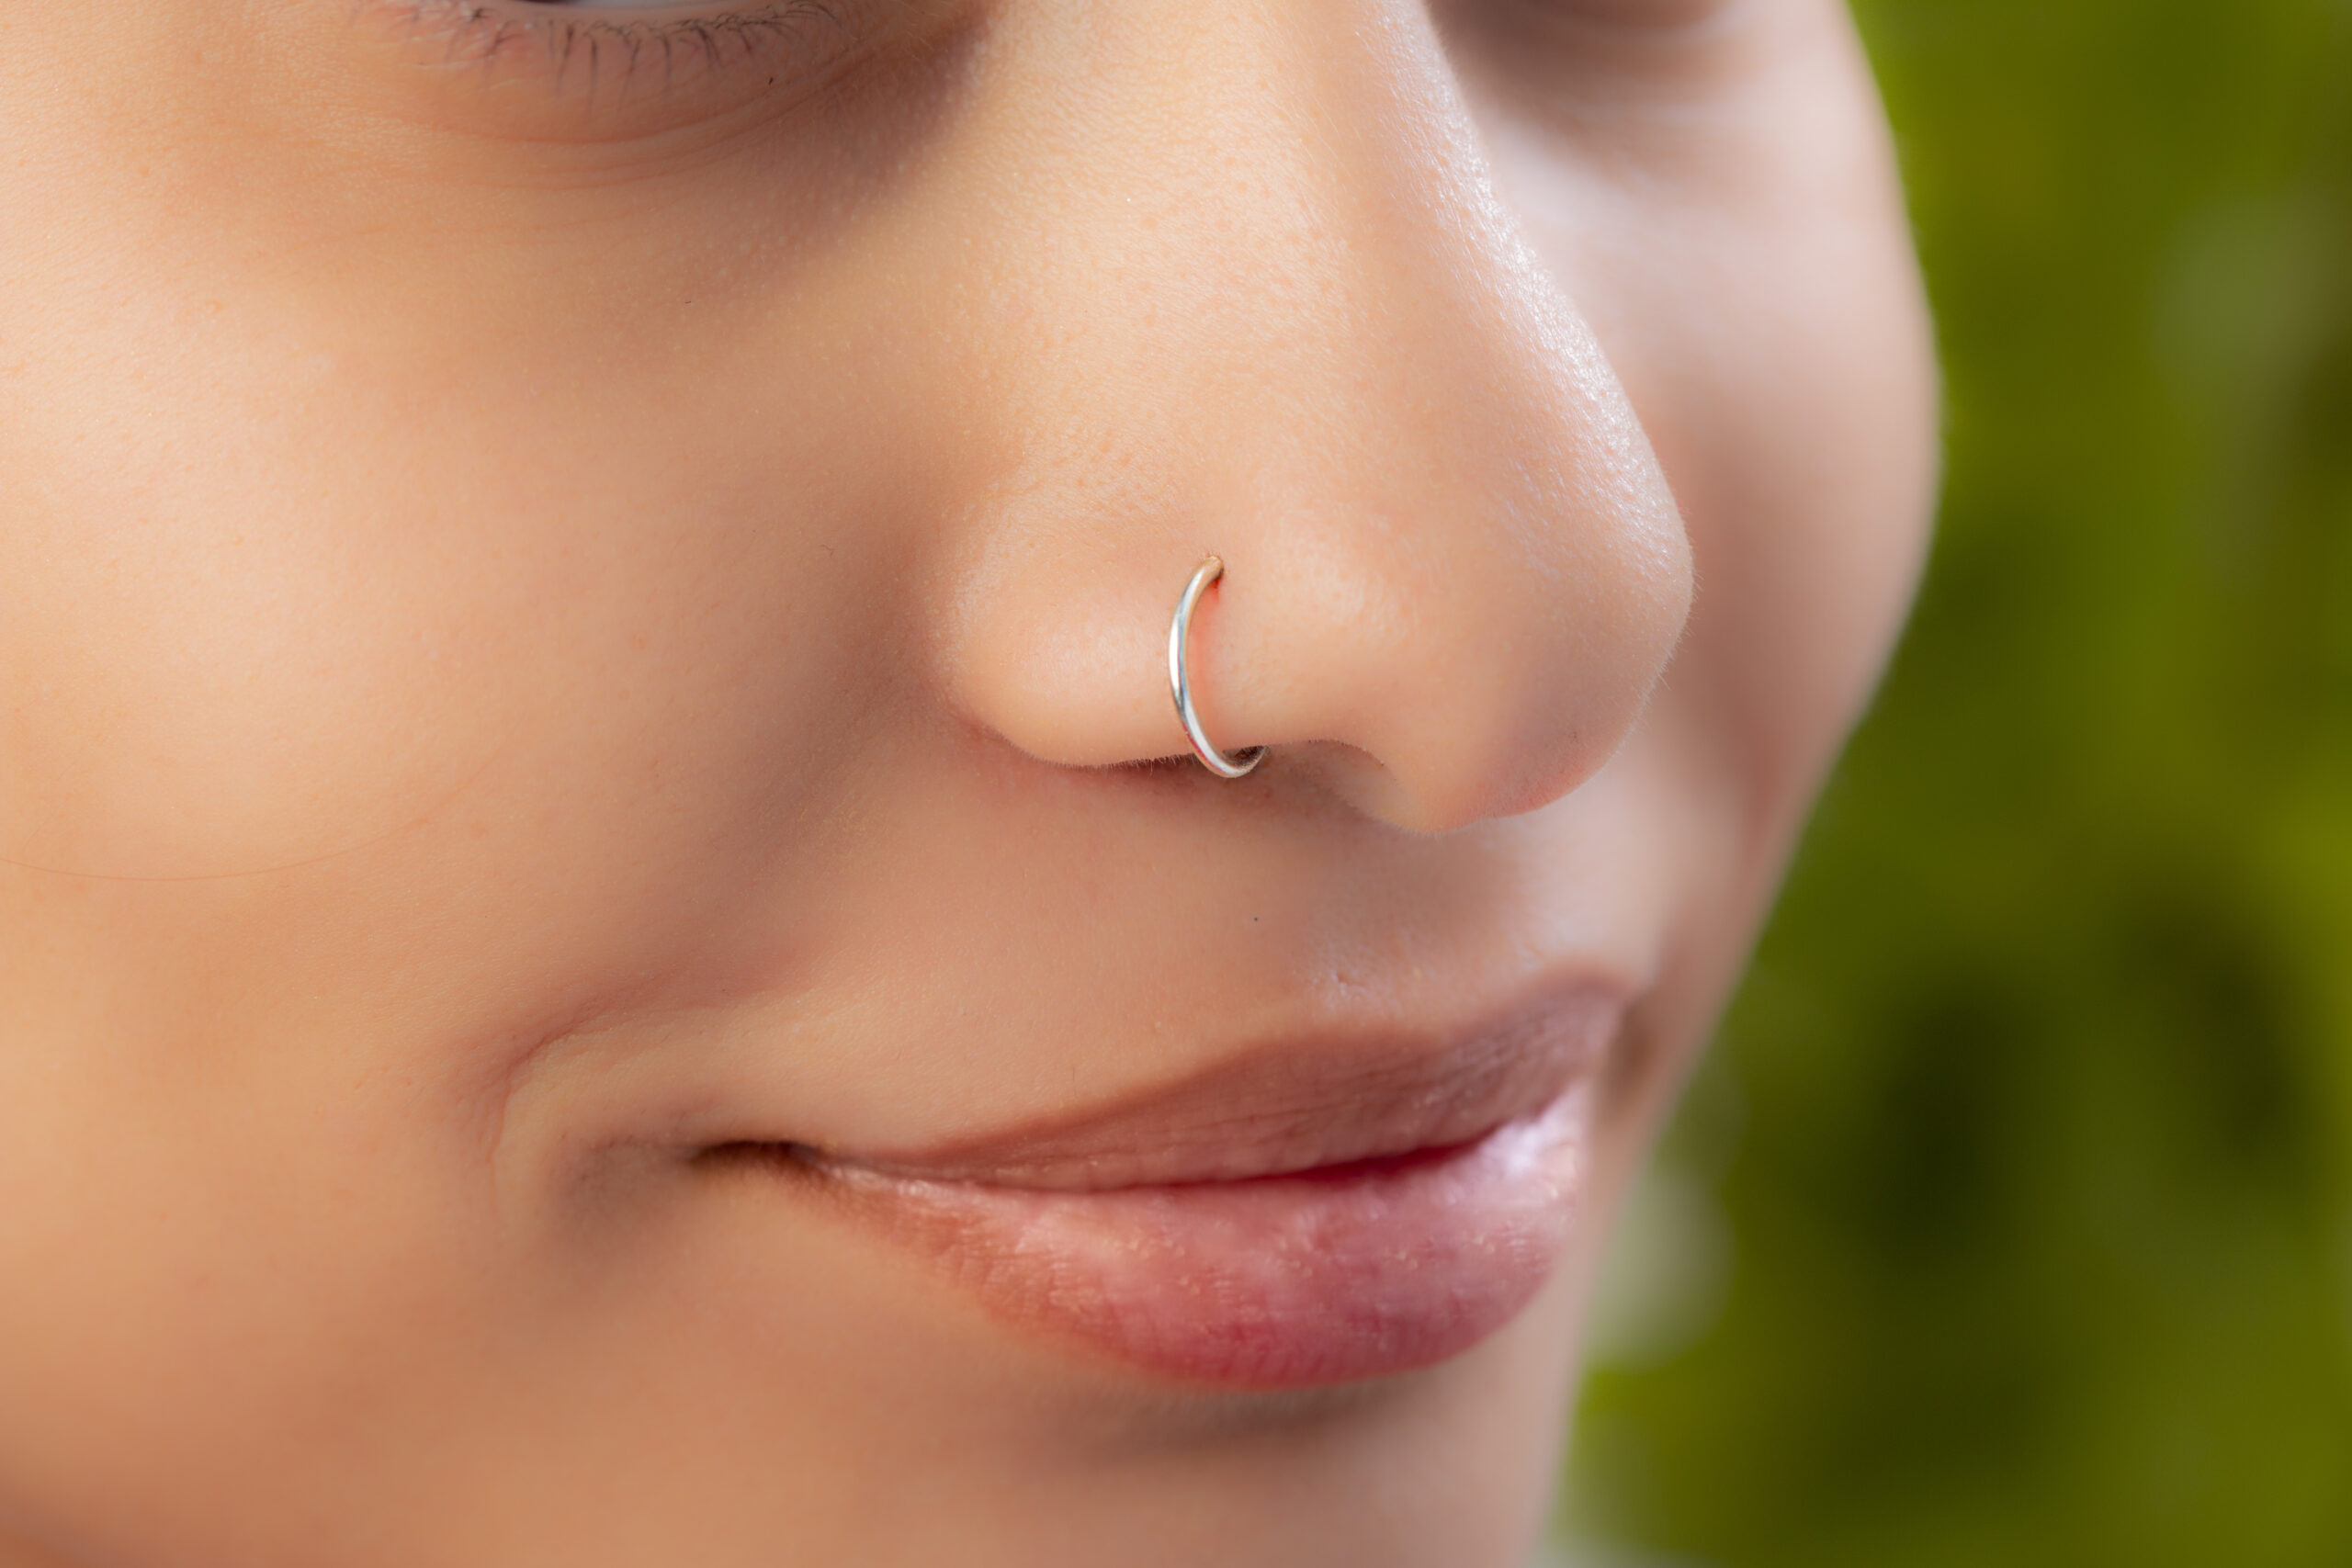 Nose Pin - Buy Latest Fancy Nose Pins starting from ₹250 | Myntra